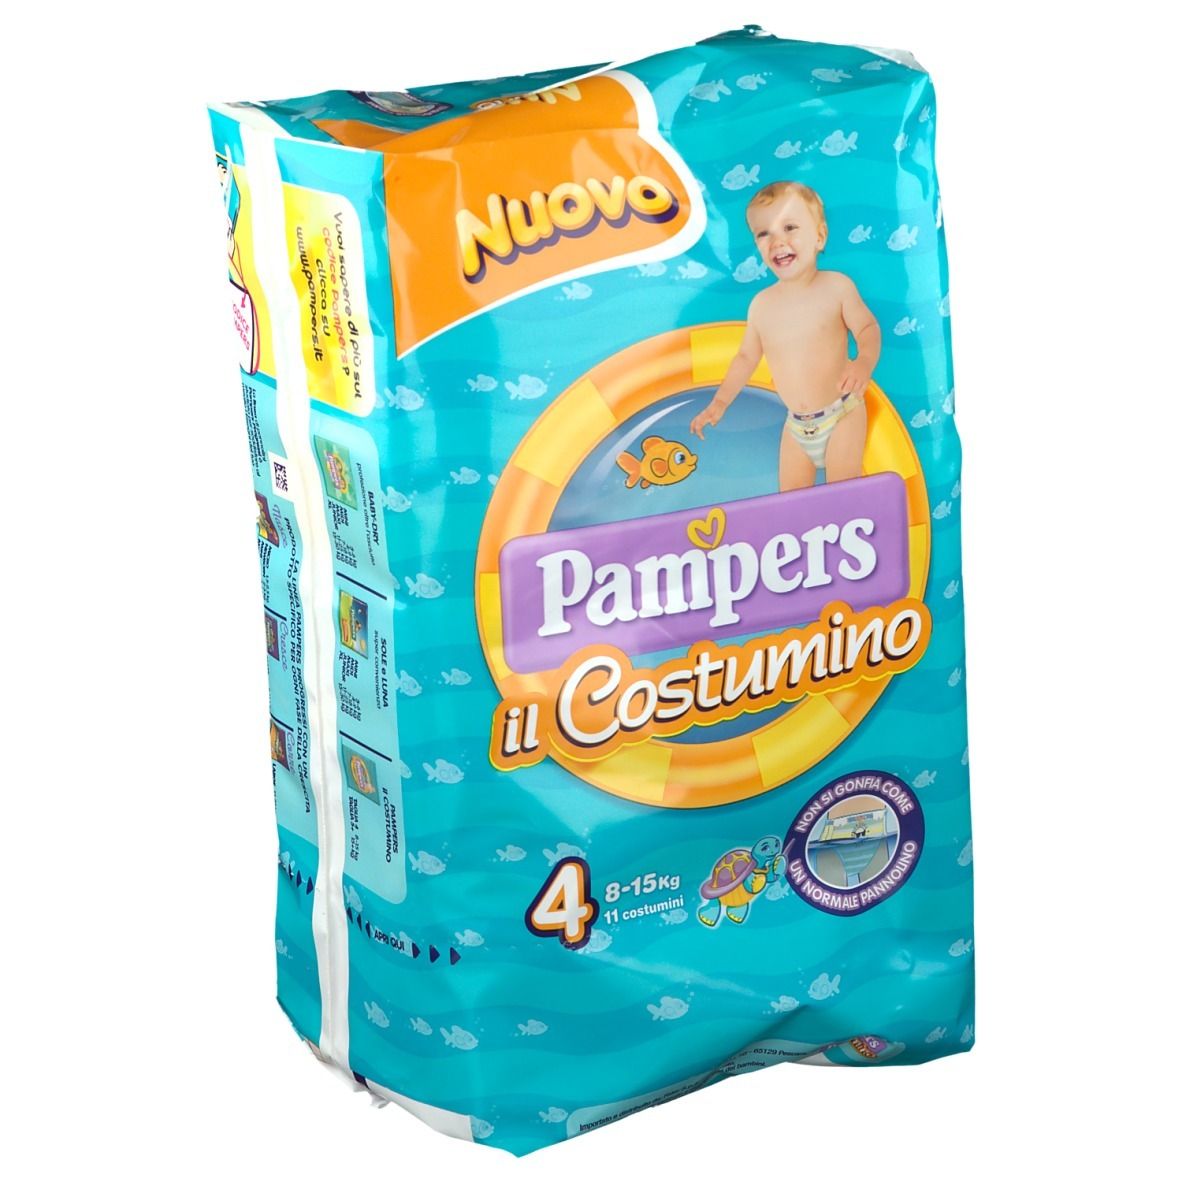 Image of Pampers Il Costumino 4